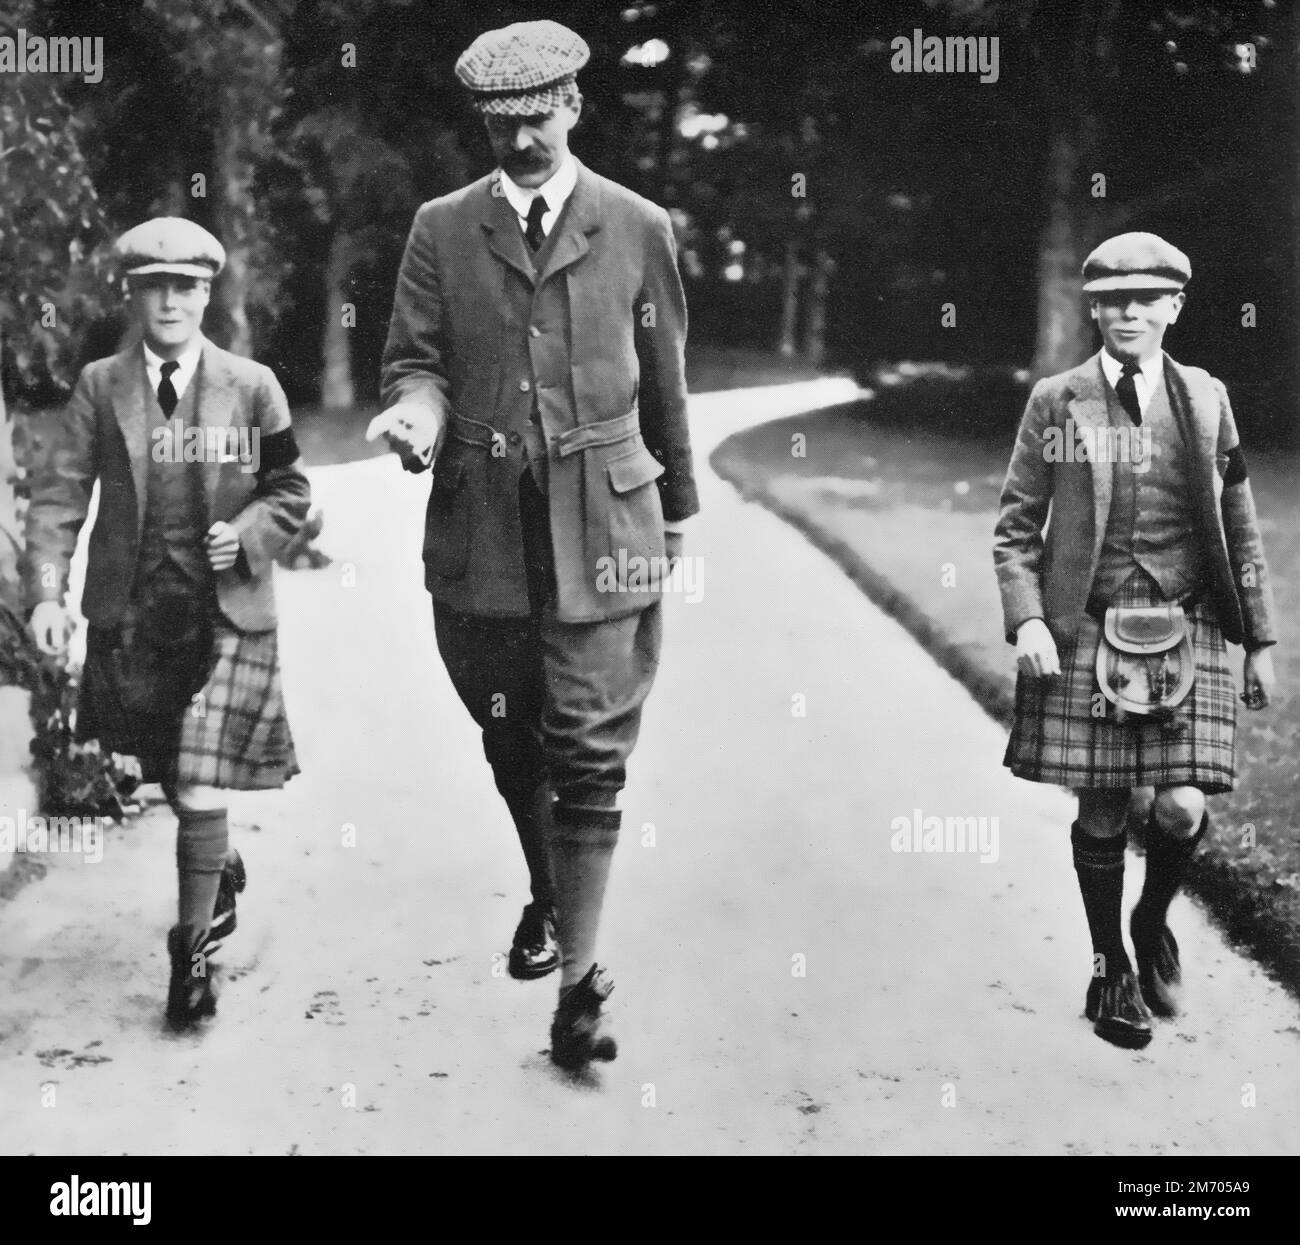 Princes Edward and Albert with their tutor Henry Peter Hansell at Balmoral, c1904. The future Kings Edward VIII (1894-1972) and George VI (1895-1952) with their tutor Peter Henry Hansell (1863-1935) at Balmoral, Scotland, c1904. Stock Photo